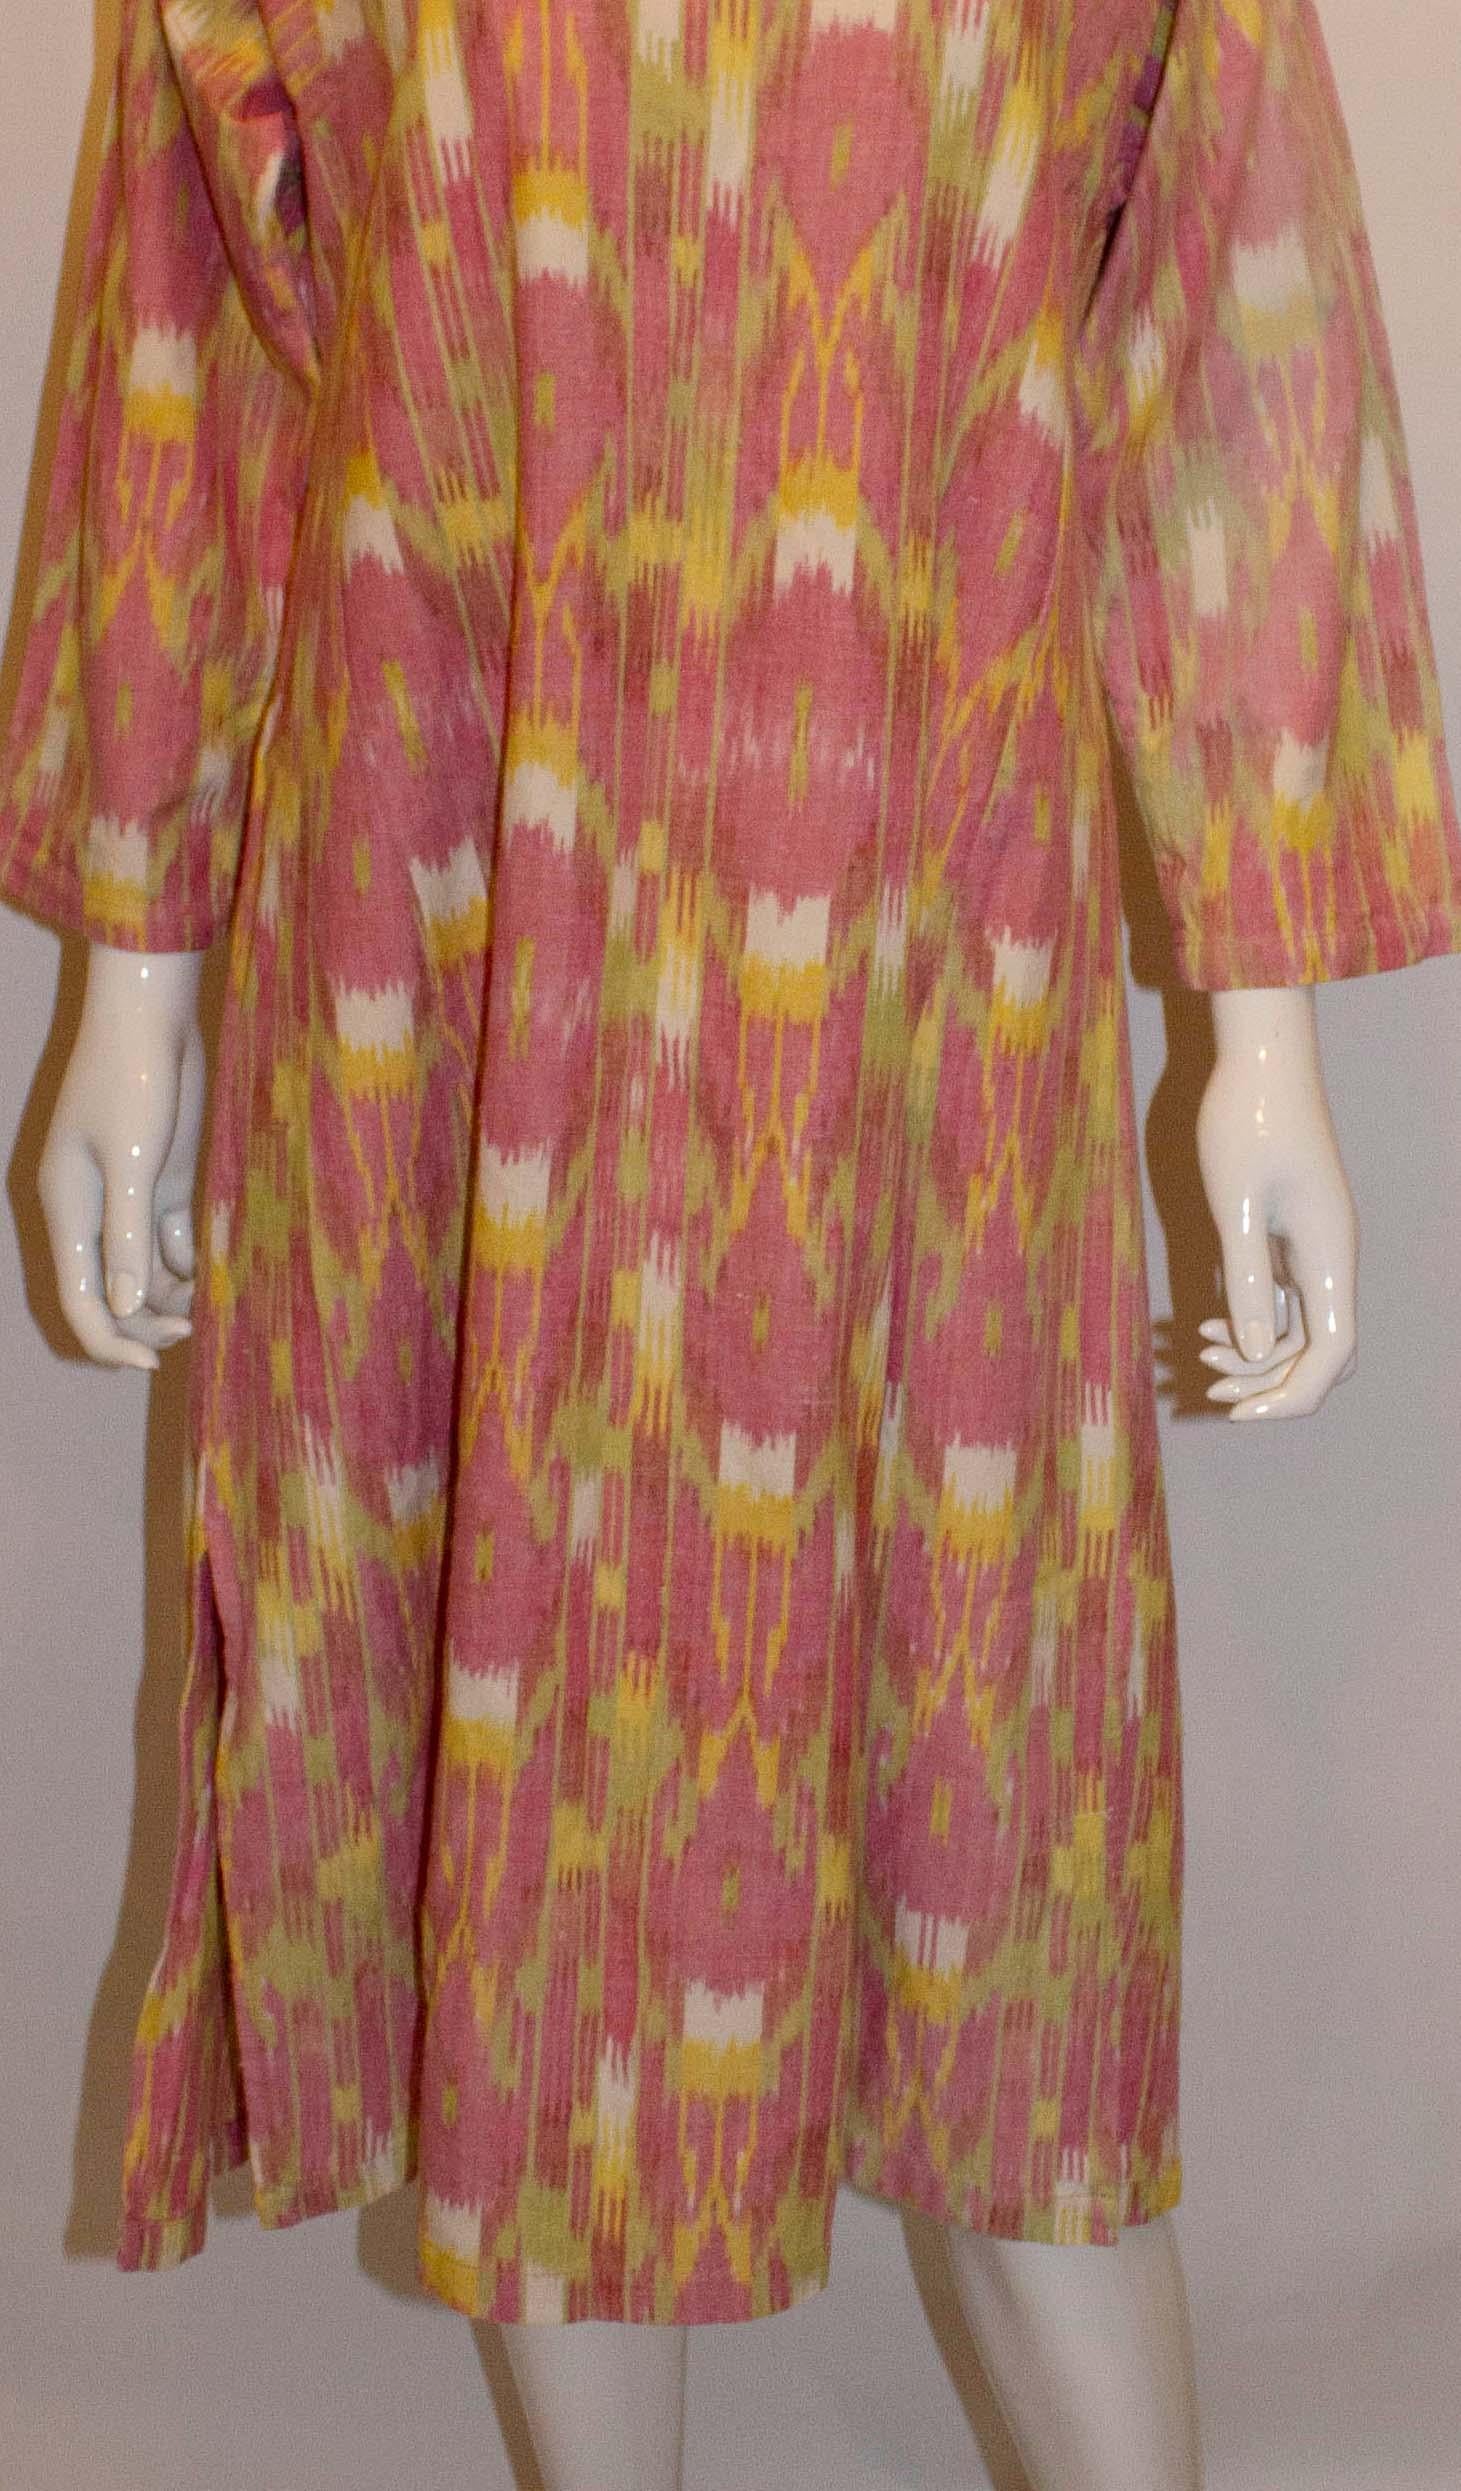 Cotton Ikat Dress In Good Condition For Sale In London, GB